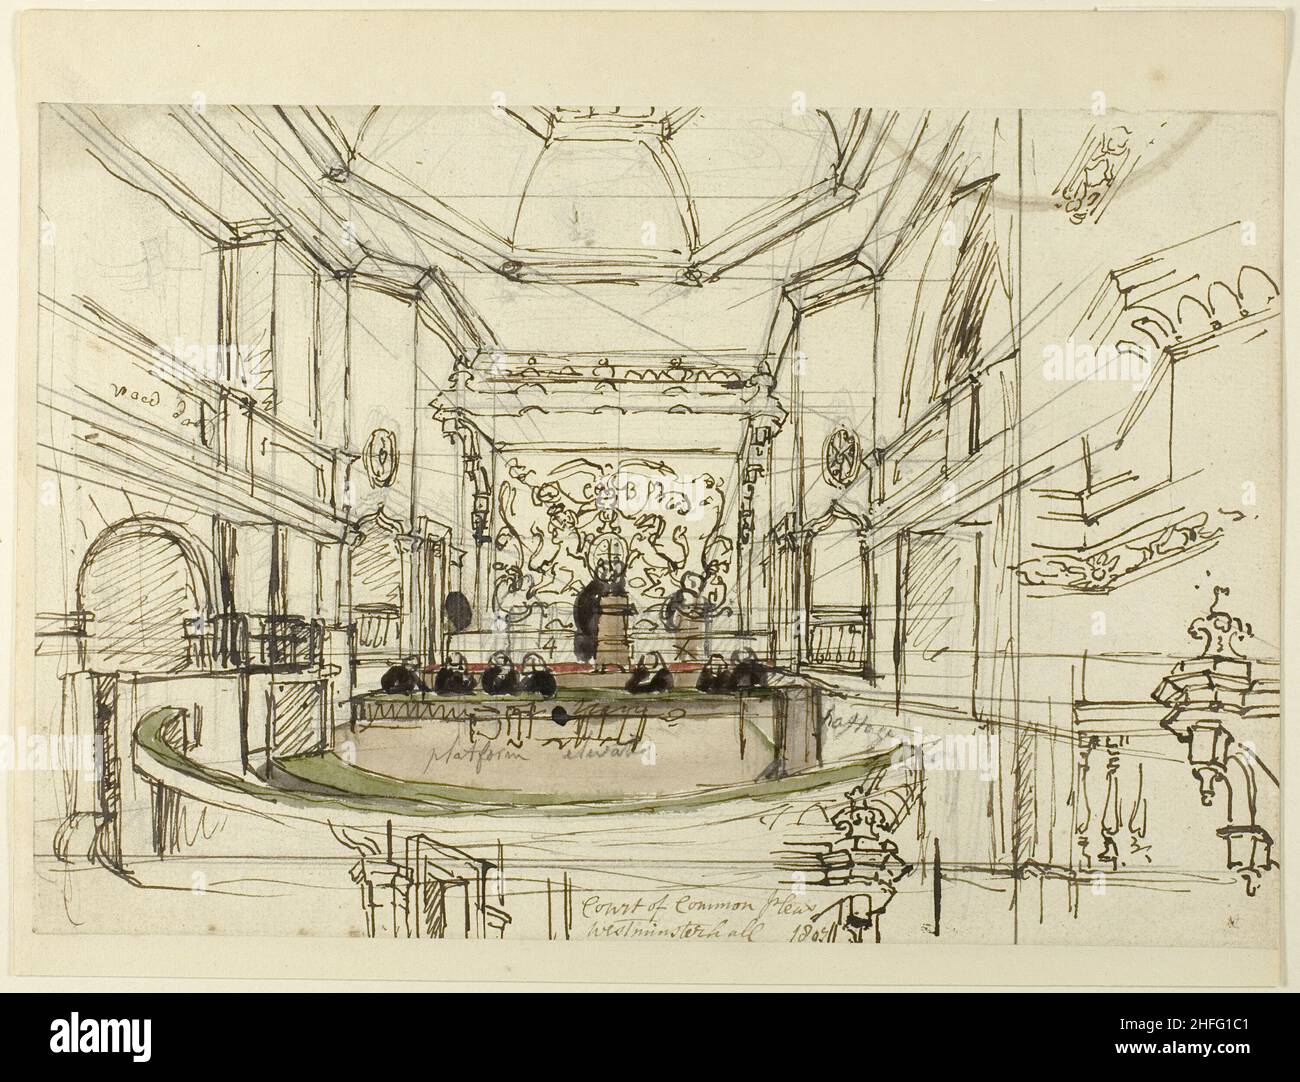 Study for Court of Common Pleas, Westminster Hall, from Microcosm of London, 1807. Stock Photo